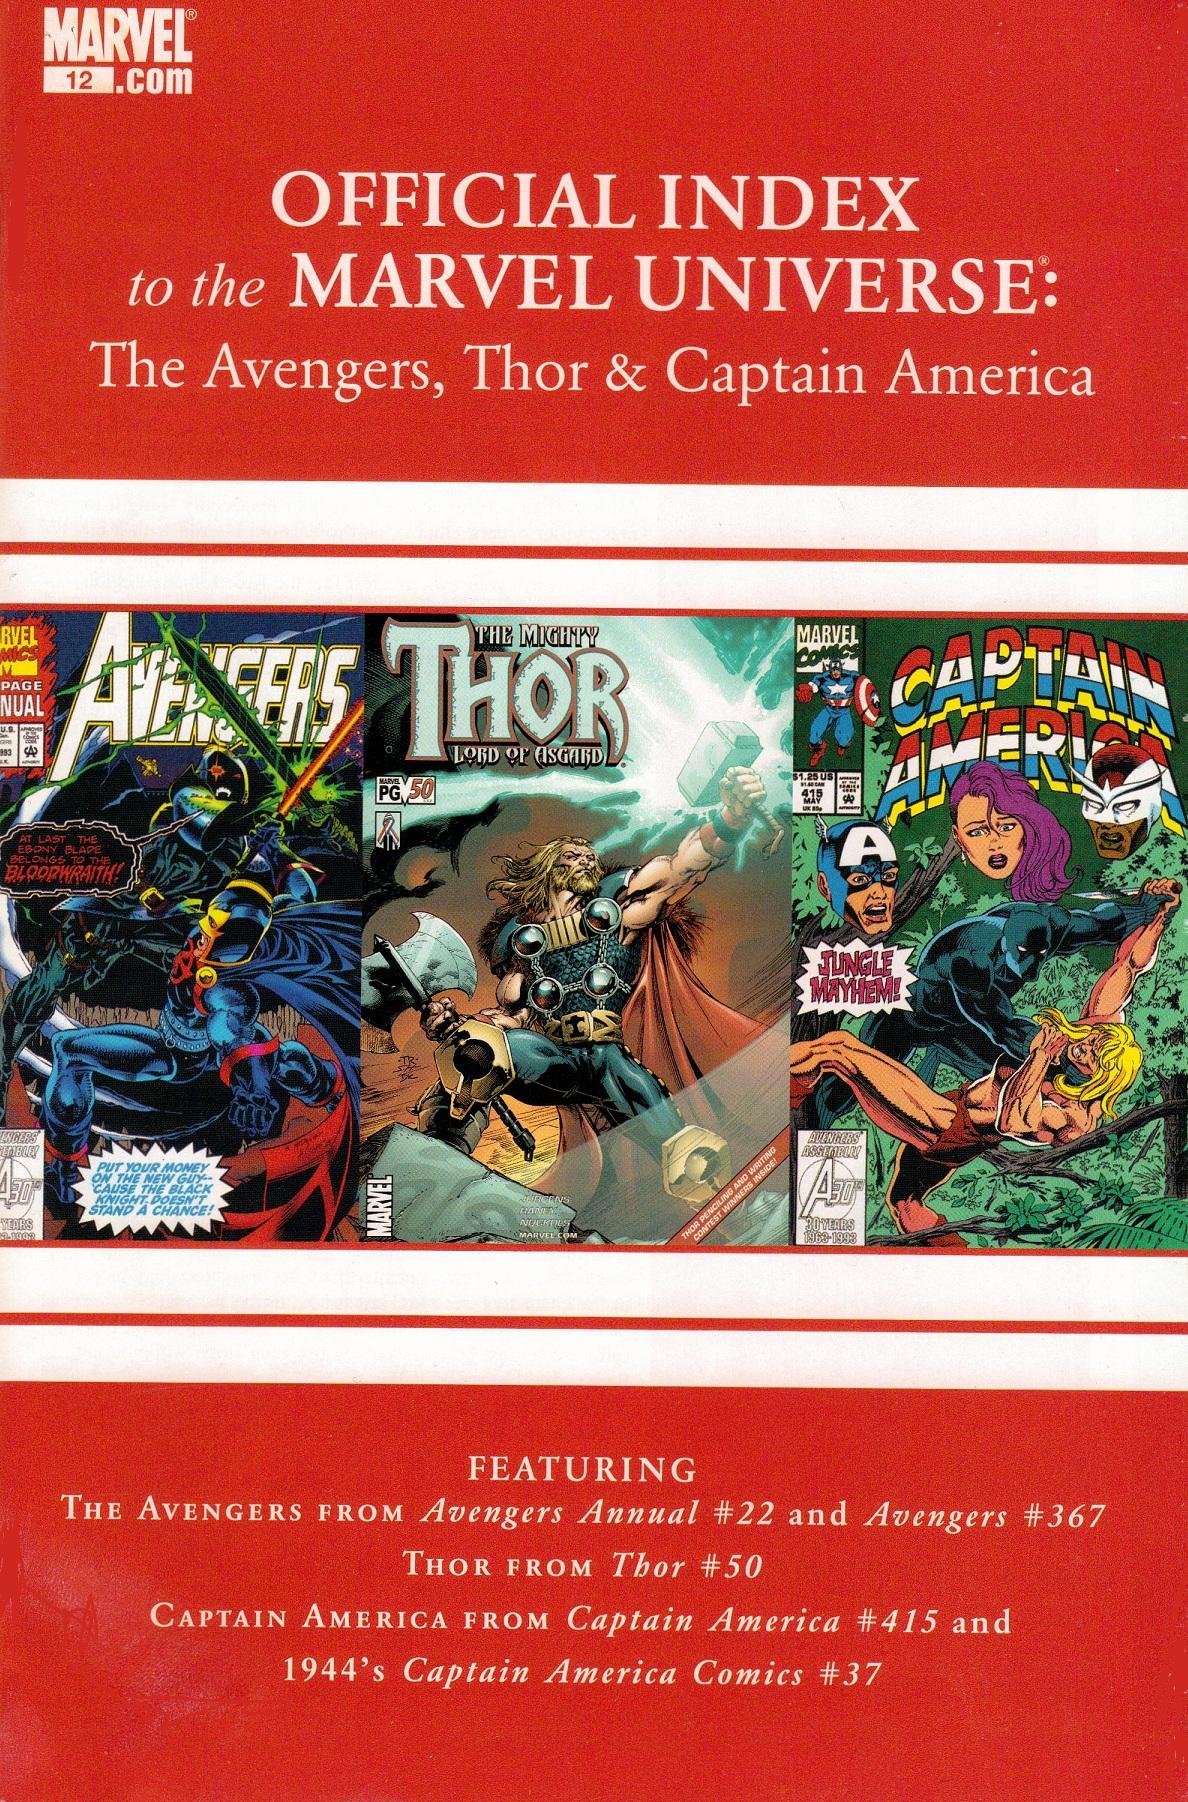 Avengers, Thor & Captain America: Official Index to the Marvel Universe Vol. 1 #12